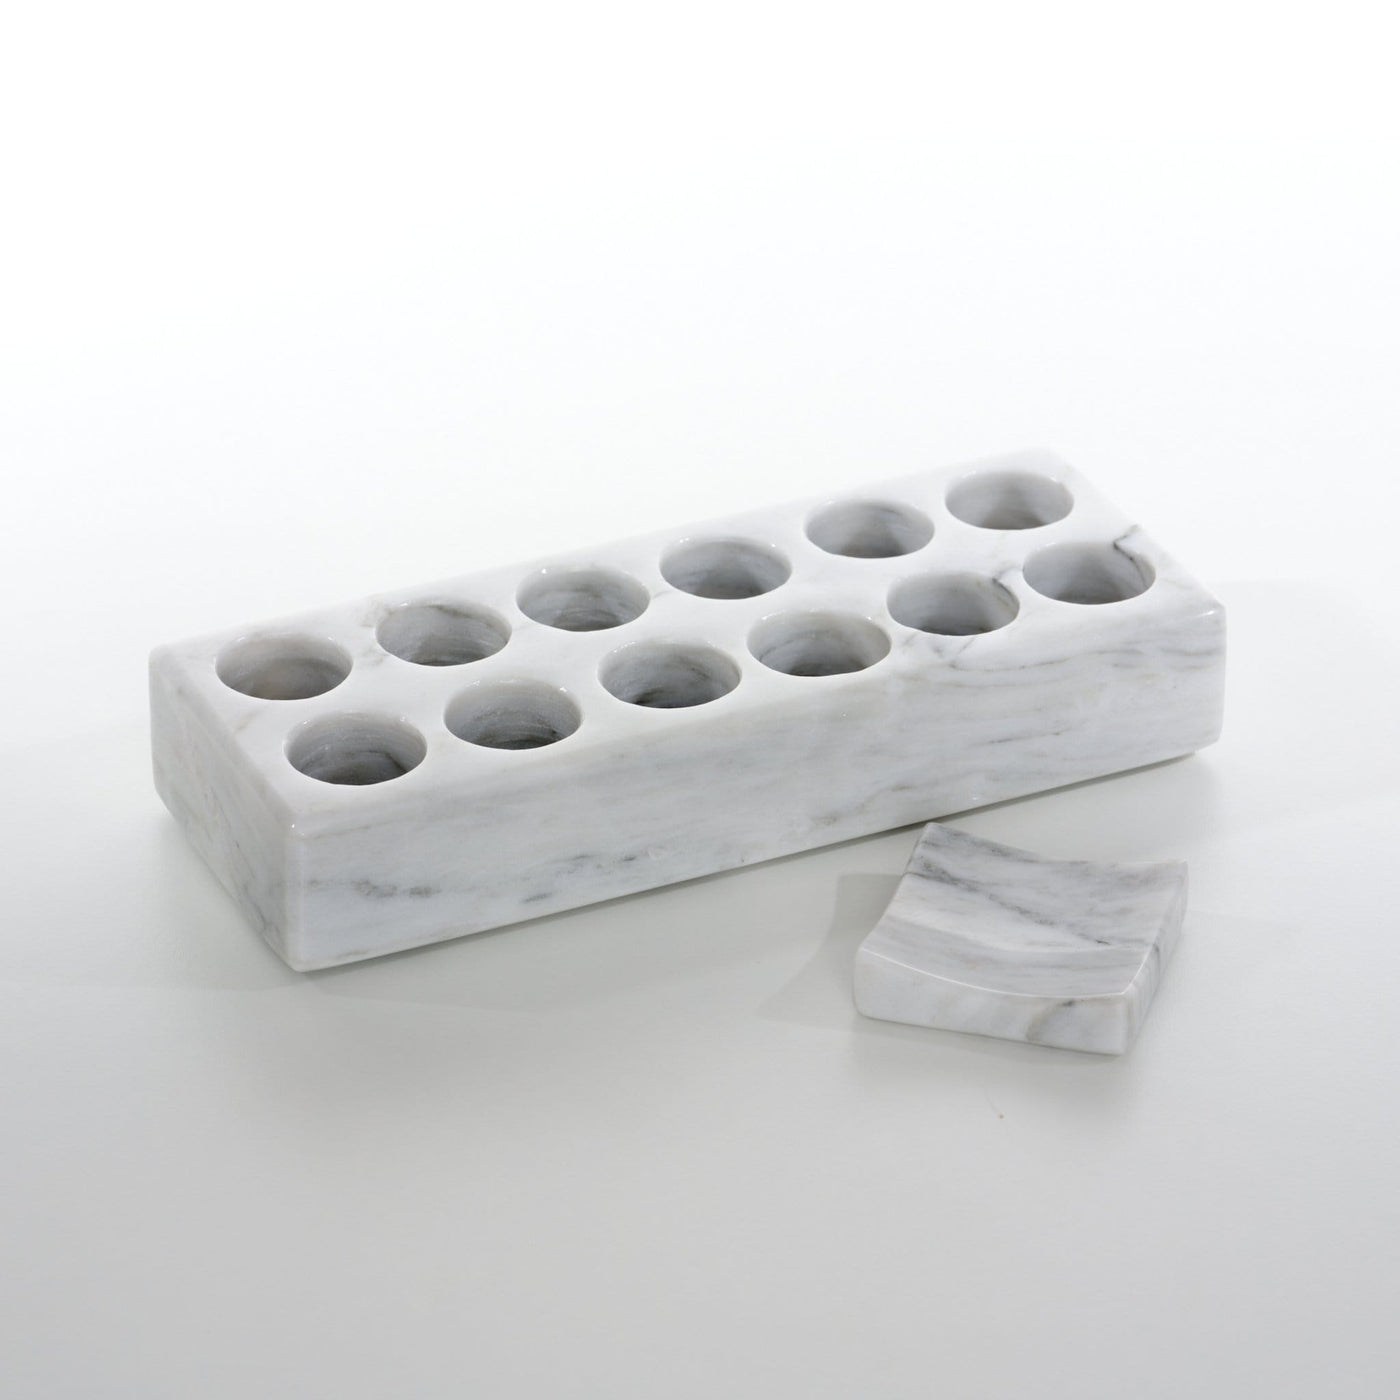 15ml Stone Essential Oil Holder - Holds 12 - Oil Life Canada - Canada's Best Essential Oil Supplies